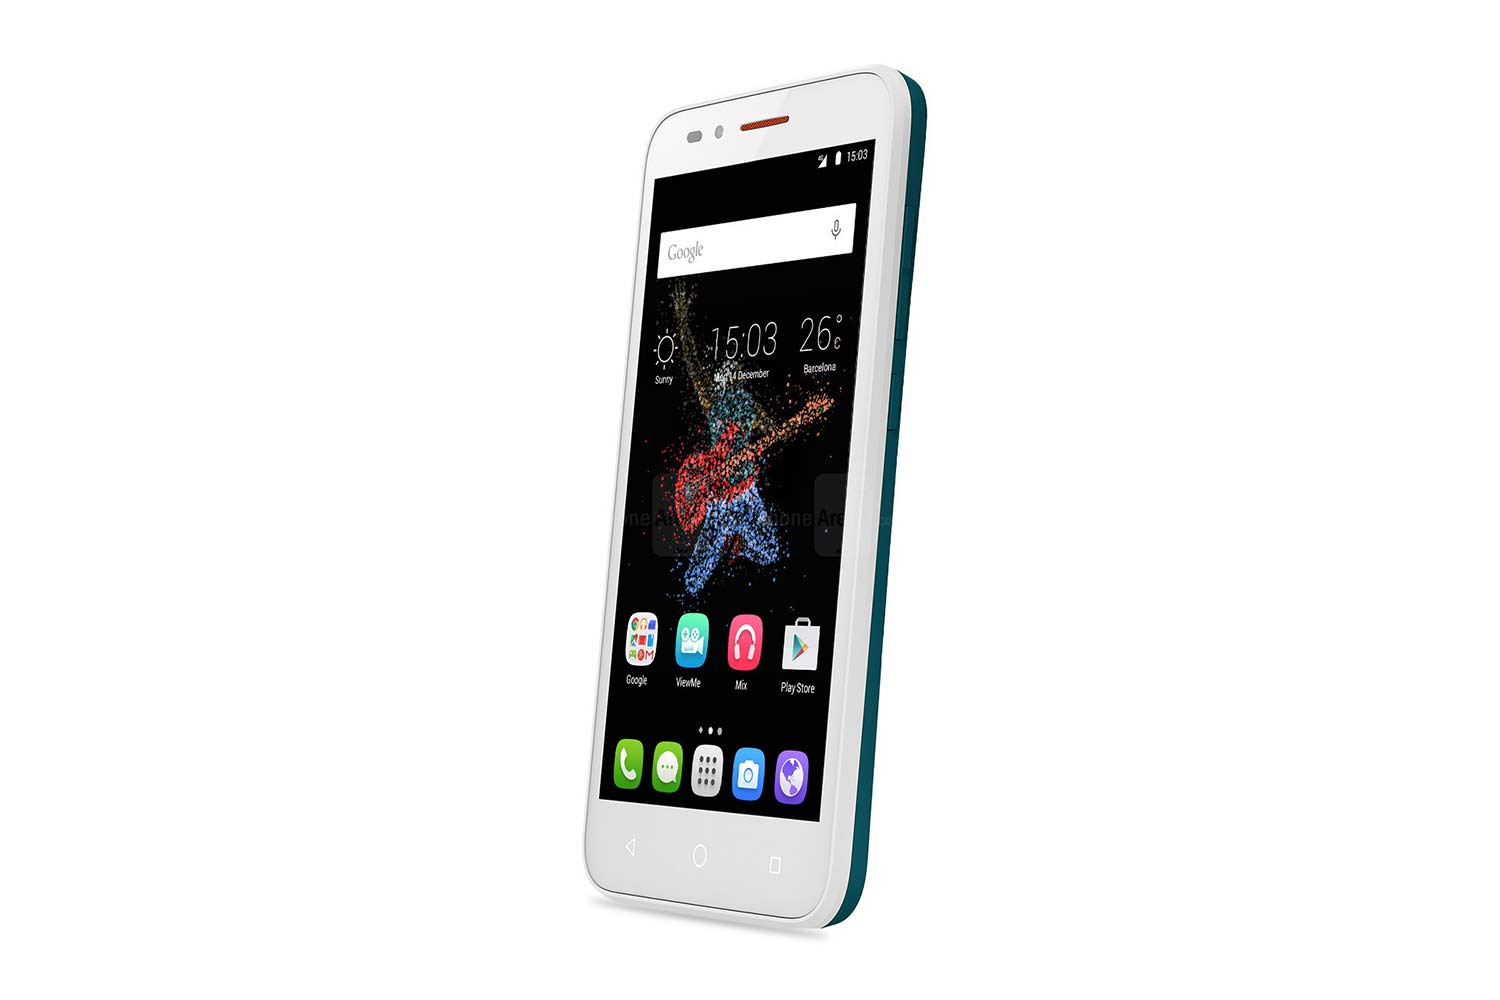 alcatel go play and watch onetouch